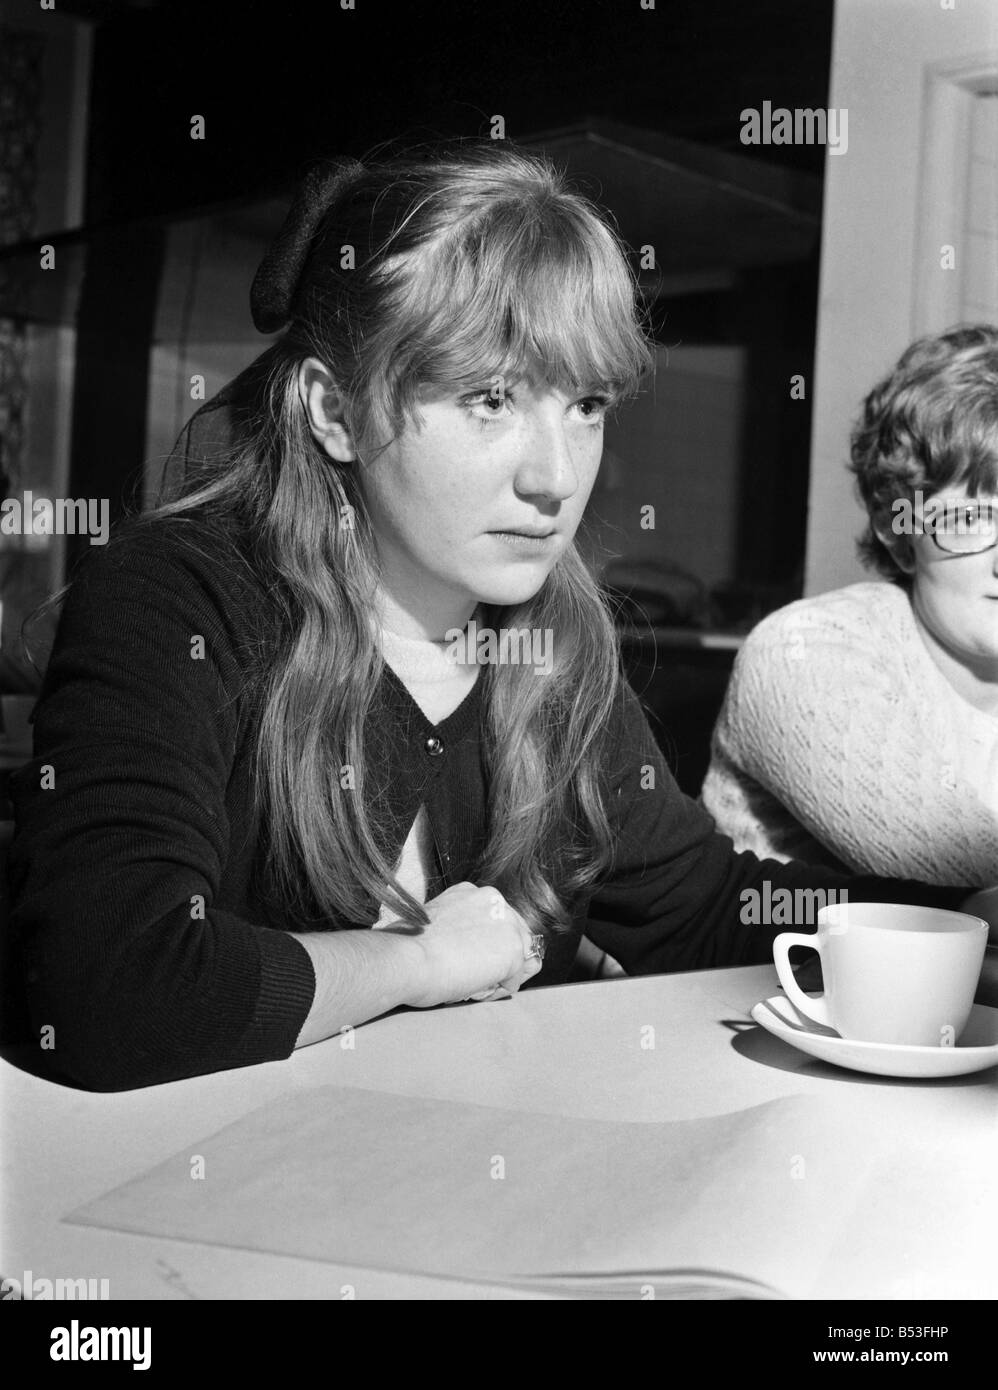 Portraits of teenagers. Boys and girls. December 1969 Z11848-003 Stock Photo